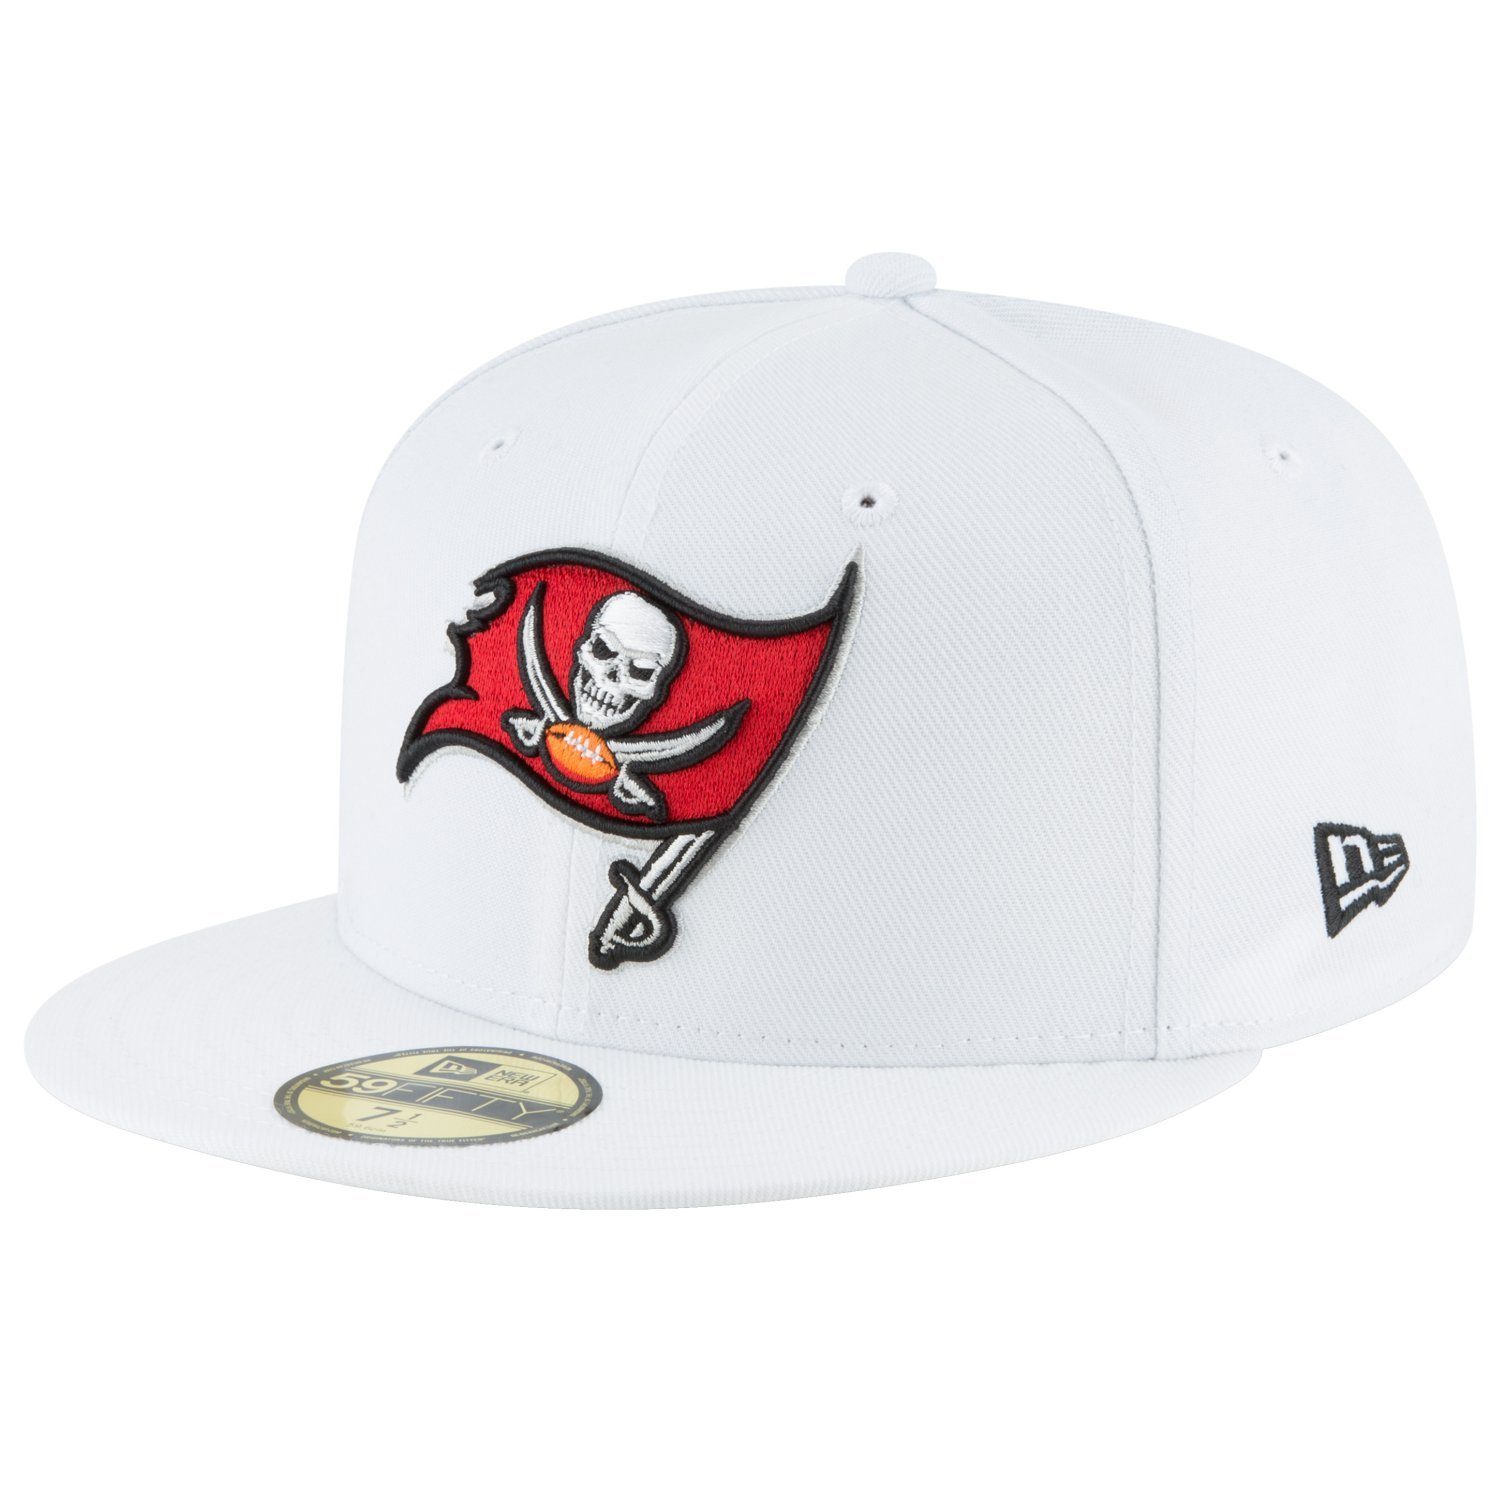 Bay Era Fitted 59Fifty Buccaneers New Tampa NFL Cap